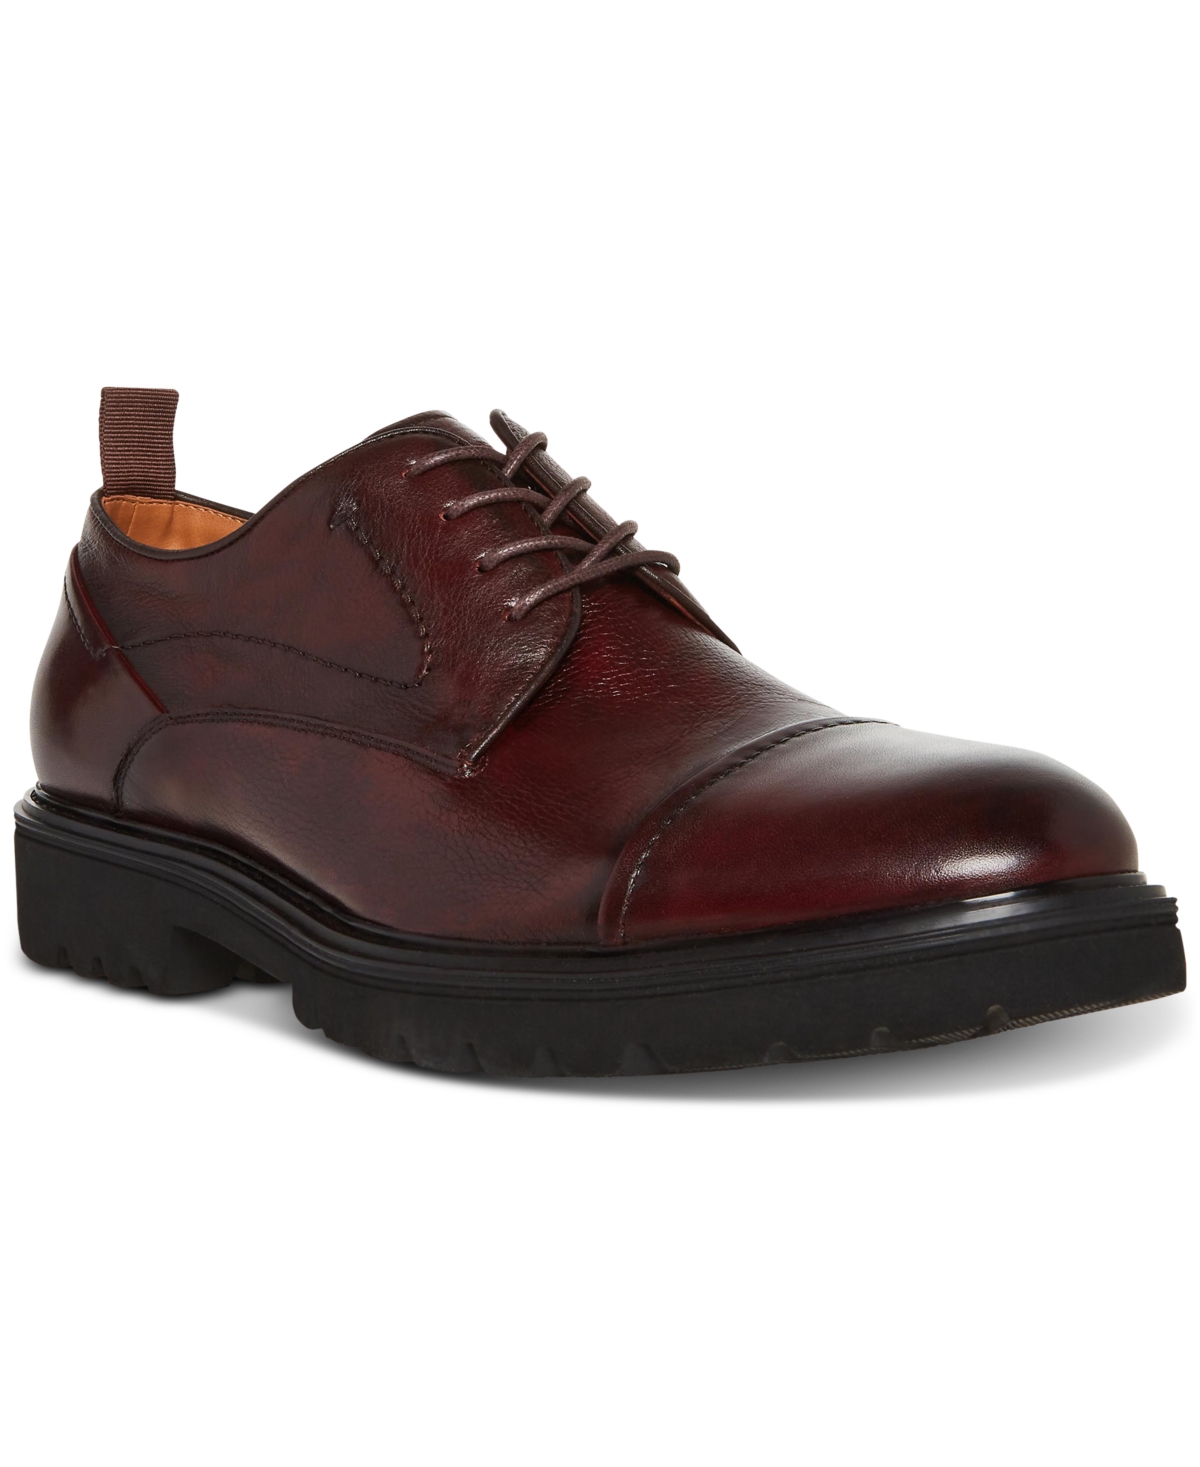 Steve Madden Men's Epcot Oxford Leather Dress Shoes In Burgundy